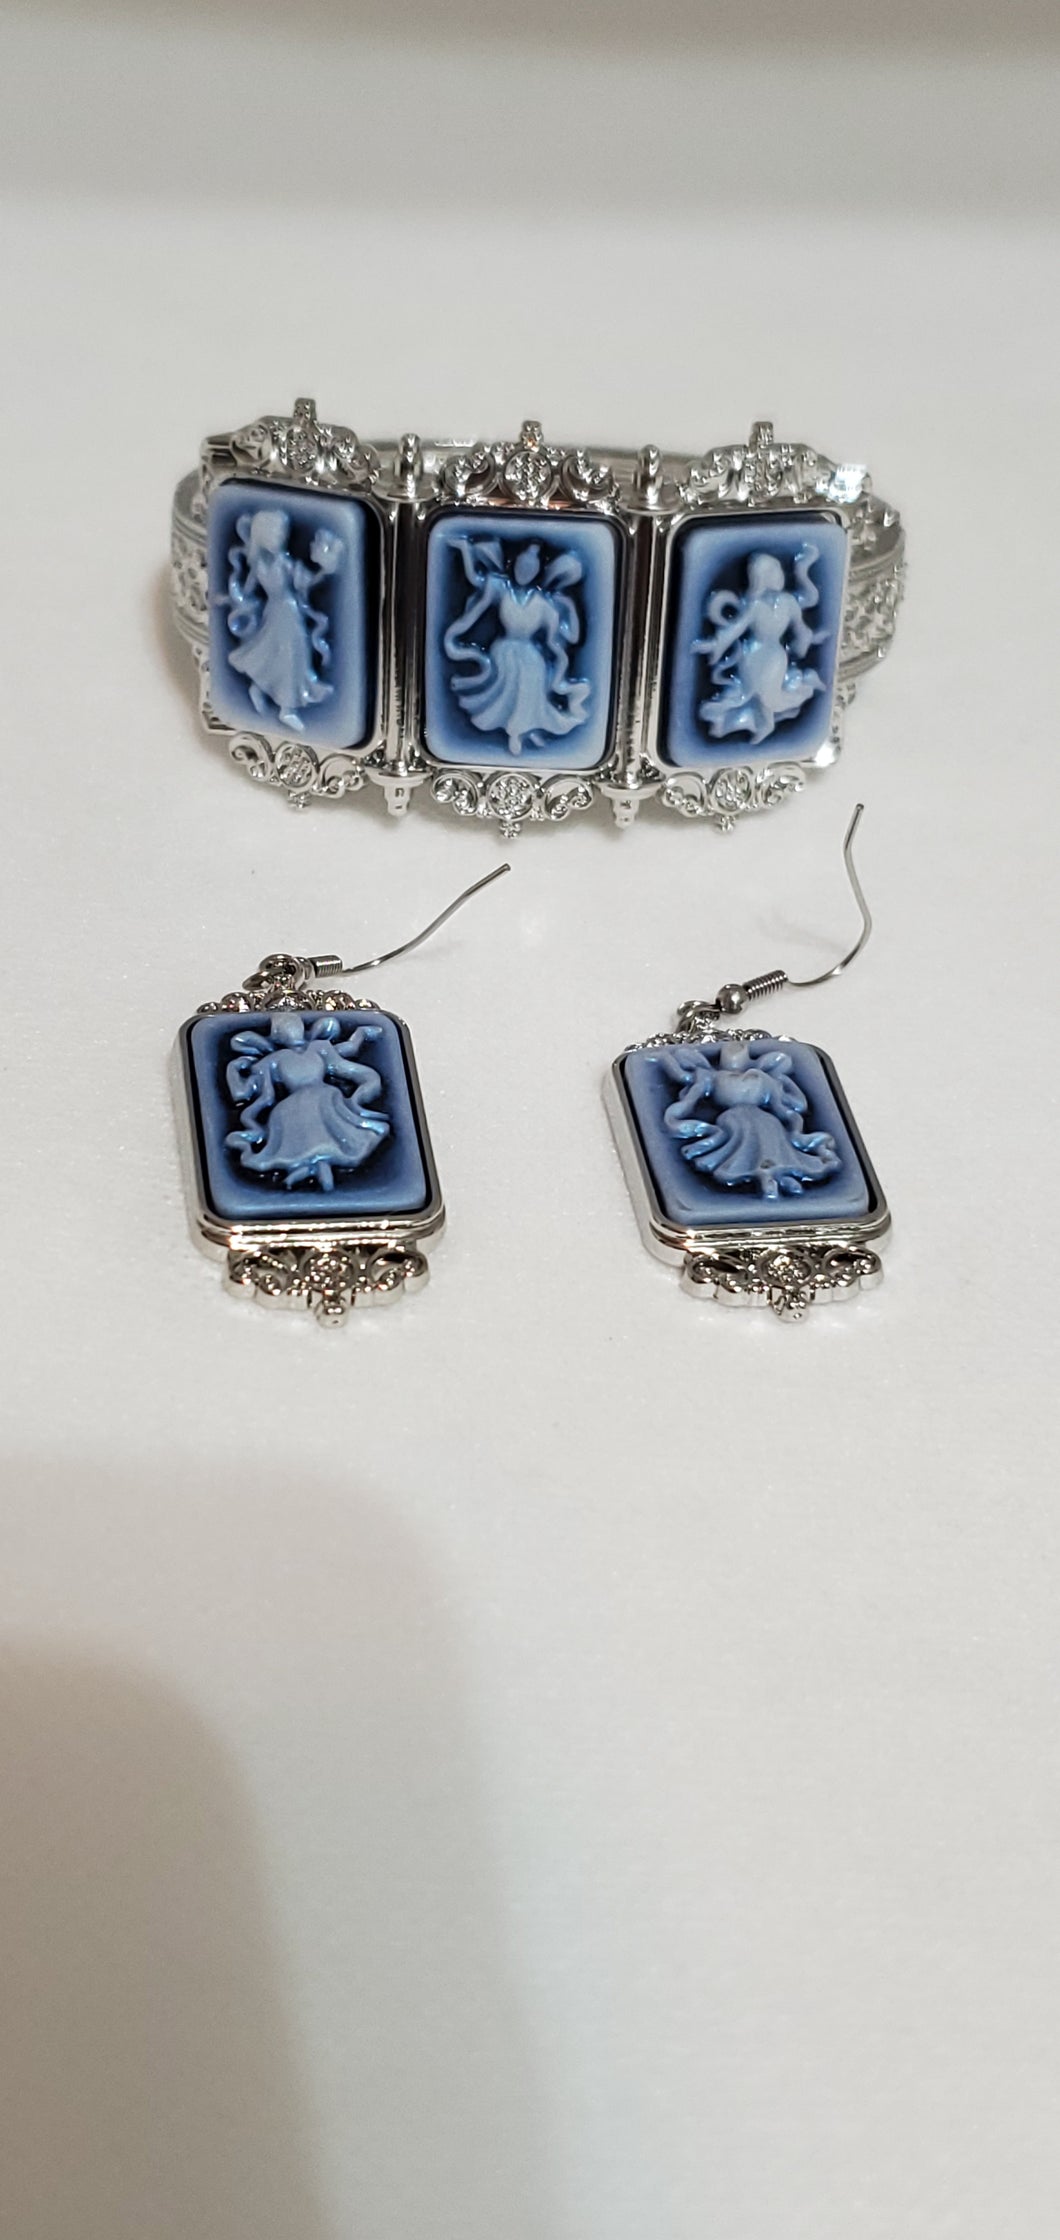 Victorian Cameo Carved Bracelet and Earrings